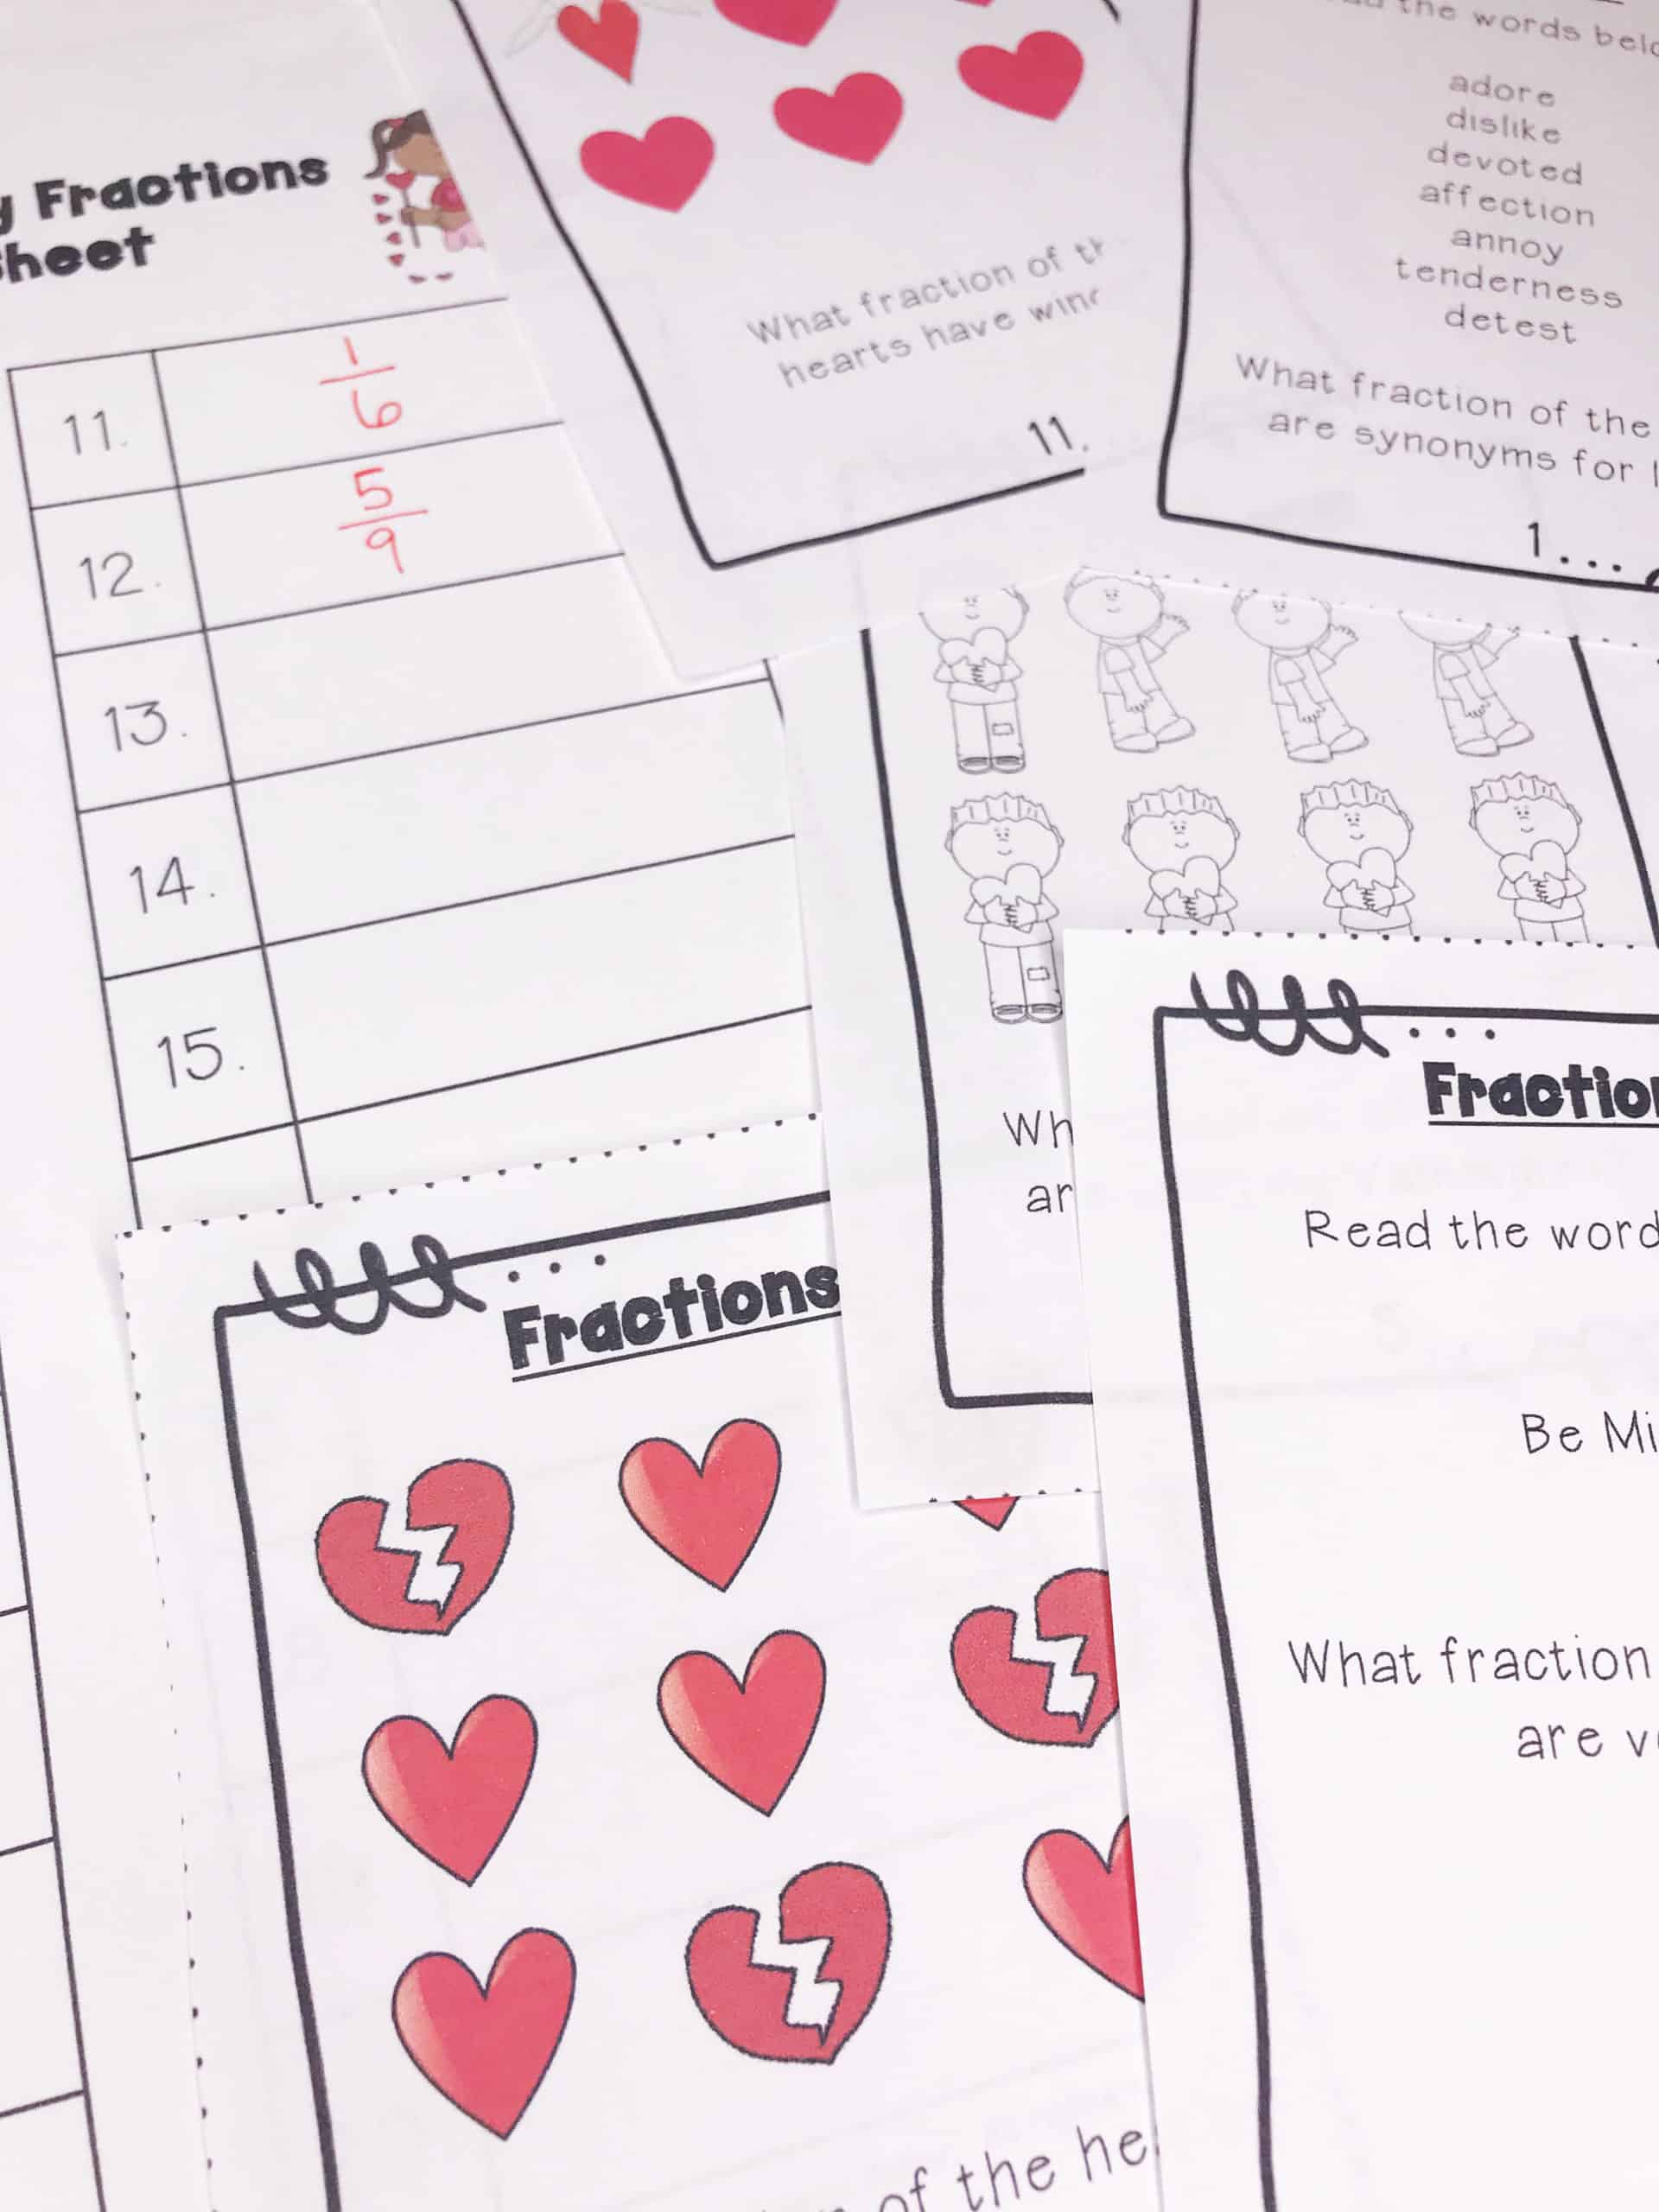 This free fraction resource is a great way to keep upper elementary students engaged and learning while still celebrating Valentine's Day